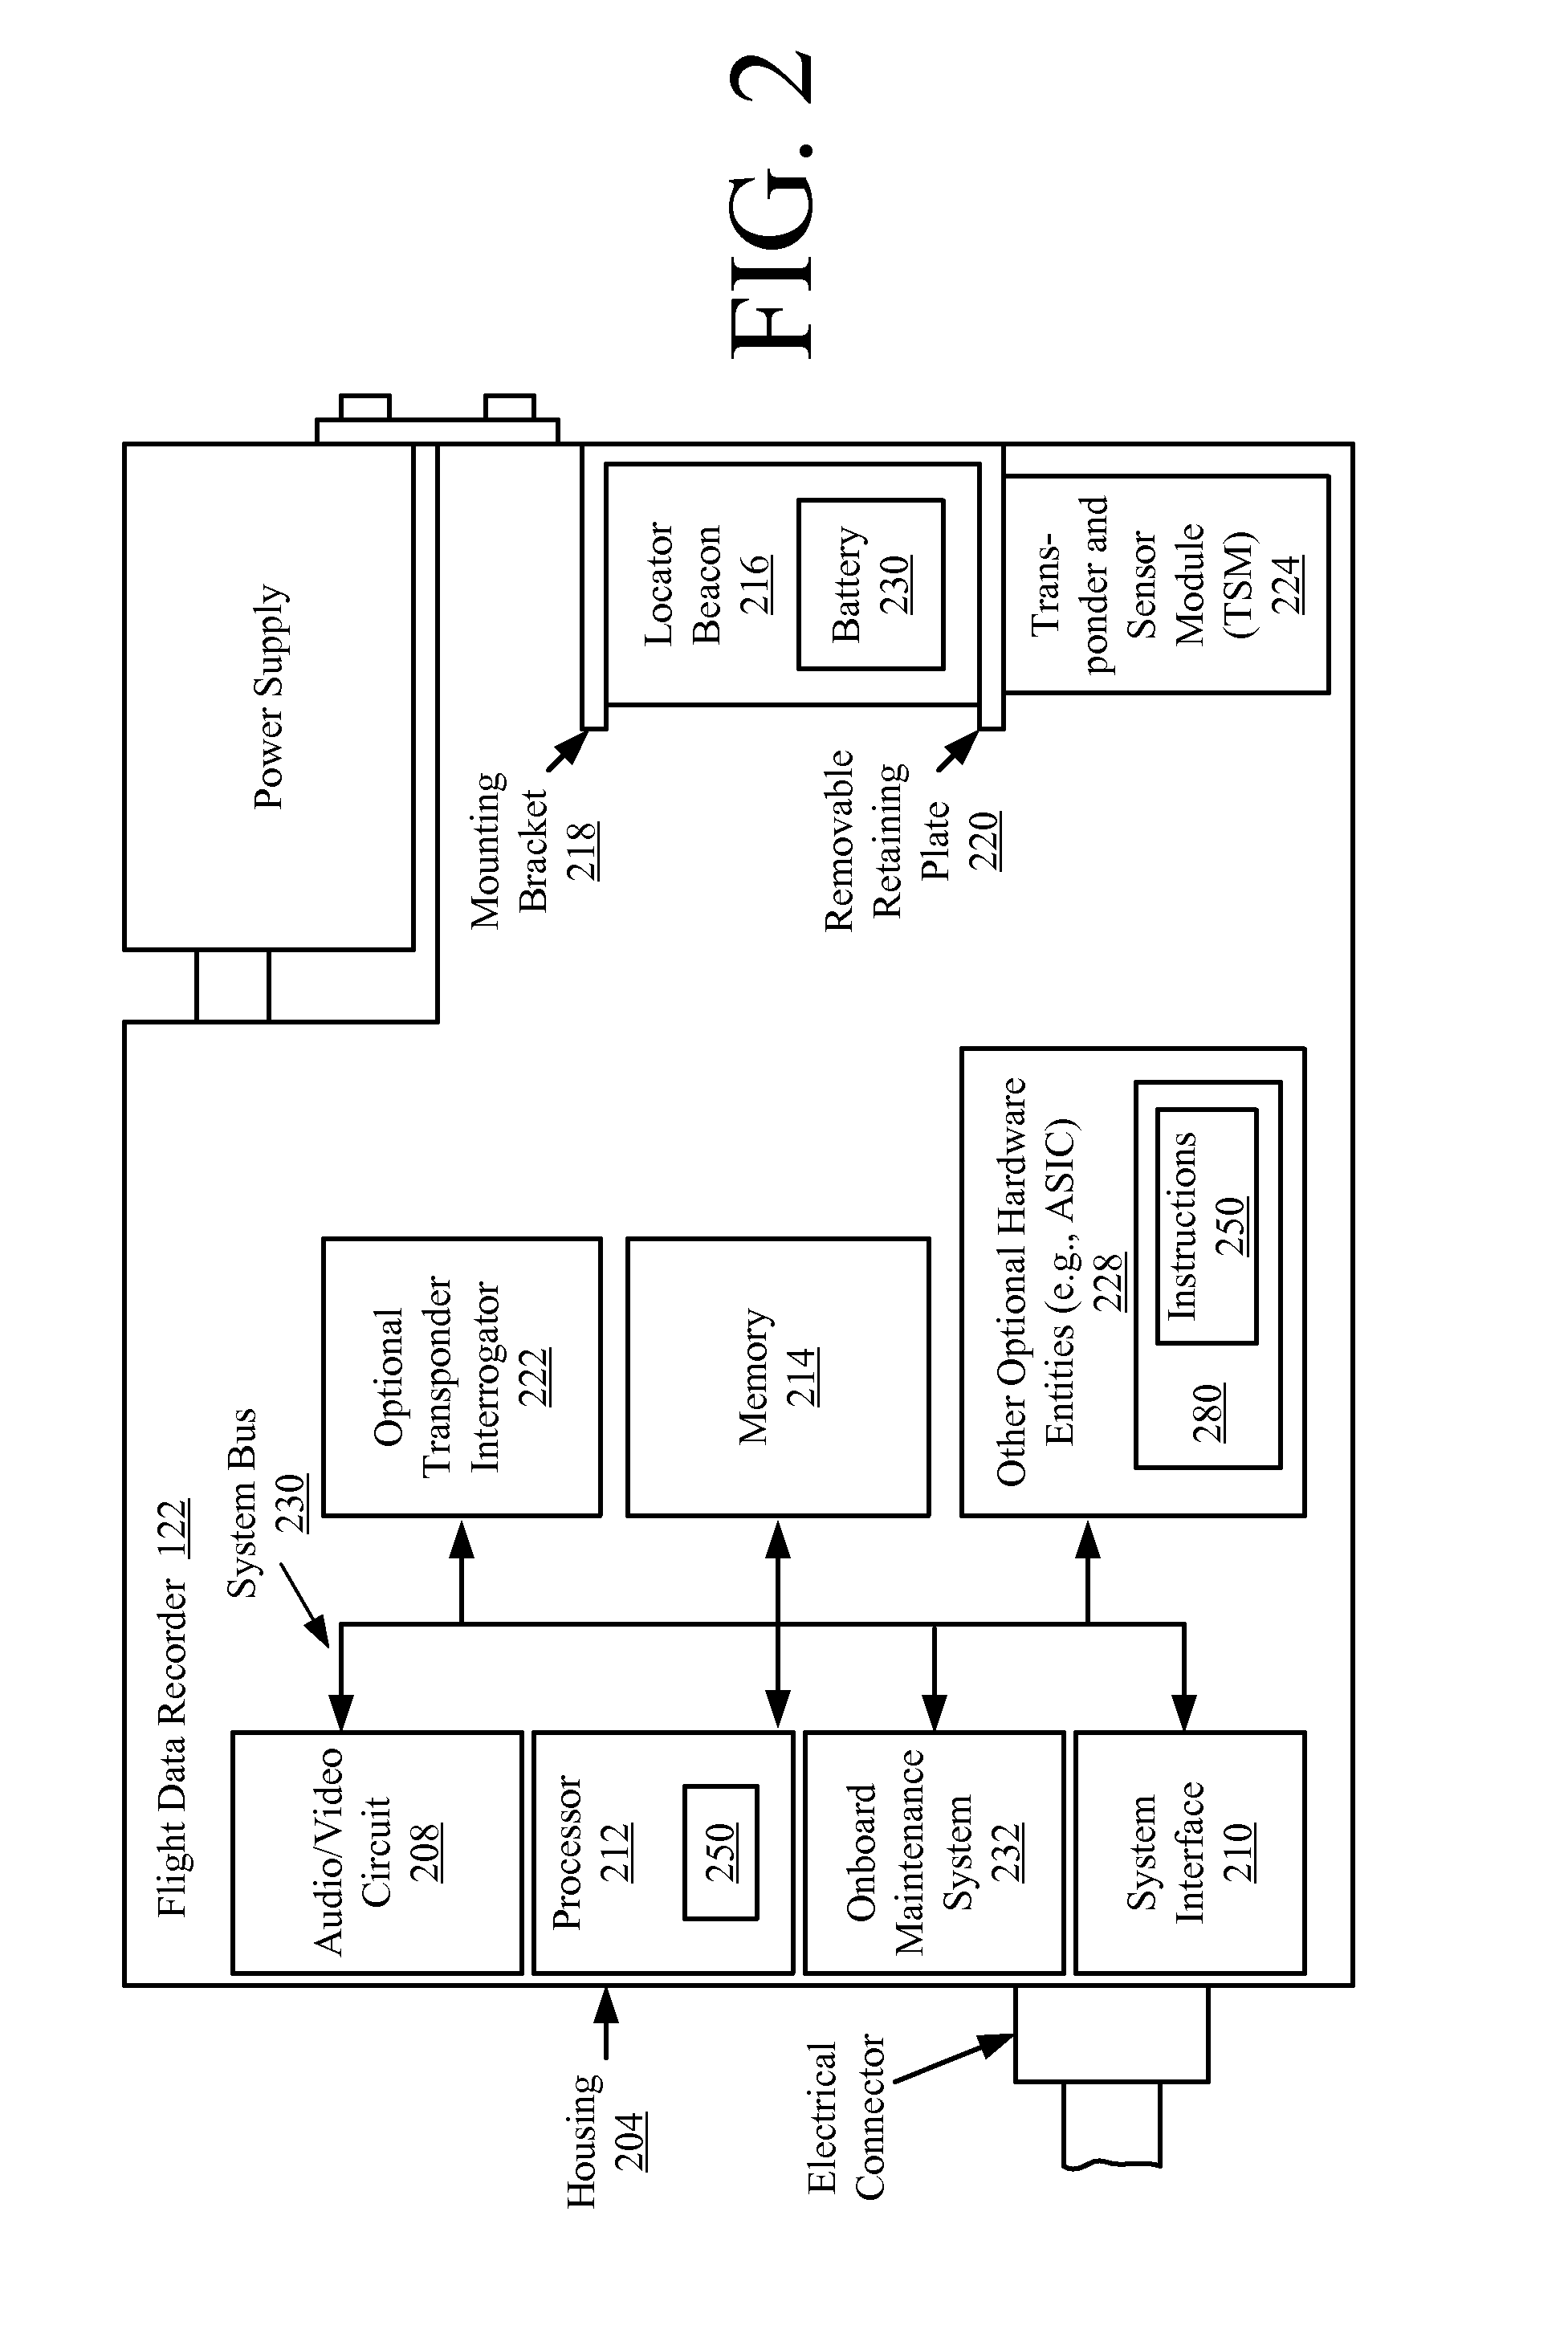 System and methods for wireless health monitoring of a locator beacon which aids the detection and location of a vehicle and/or people